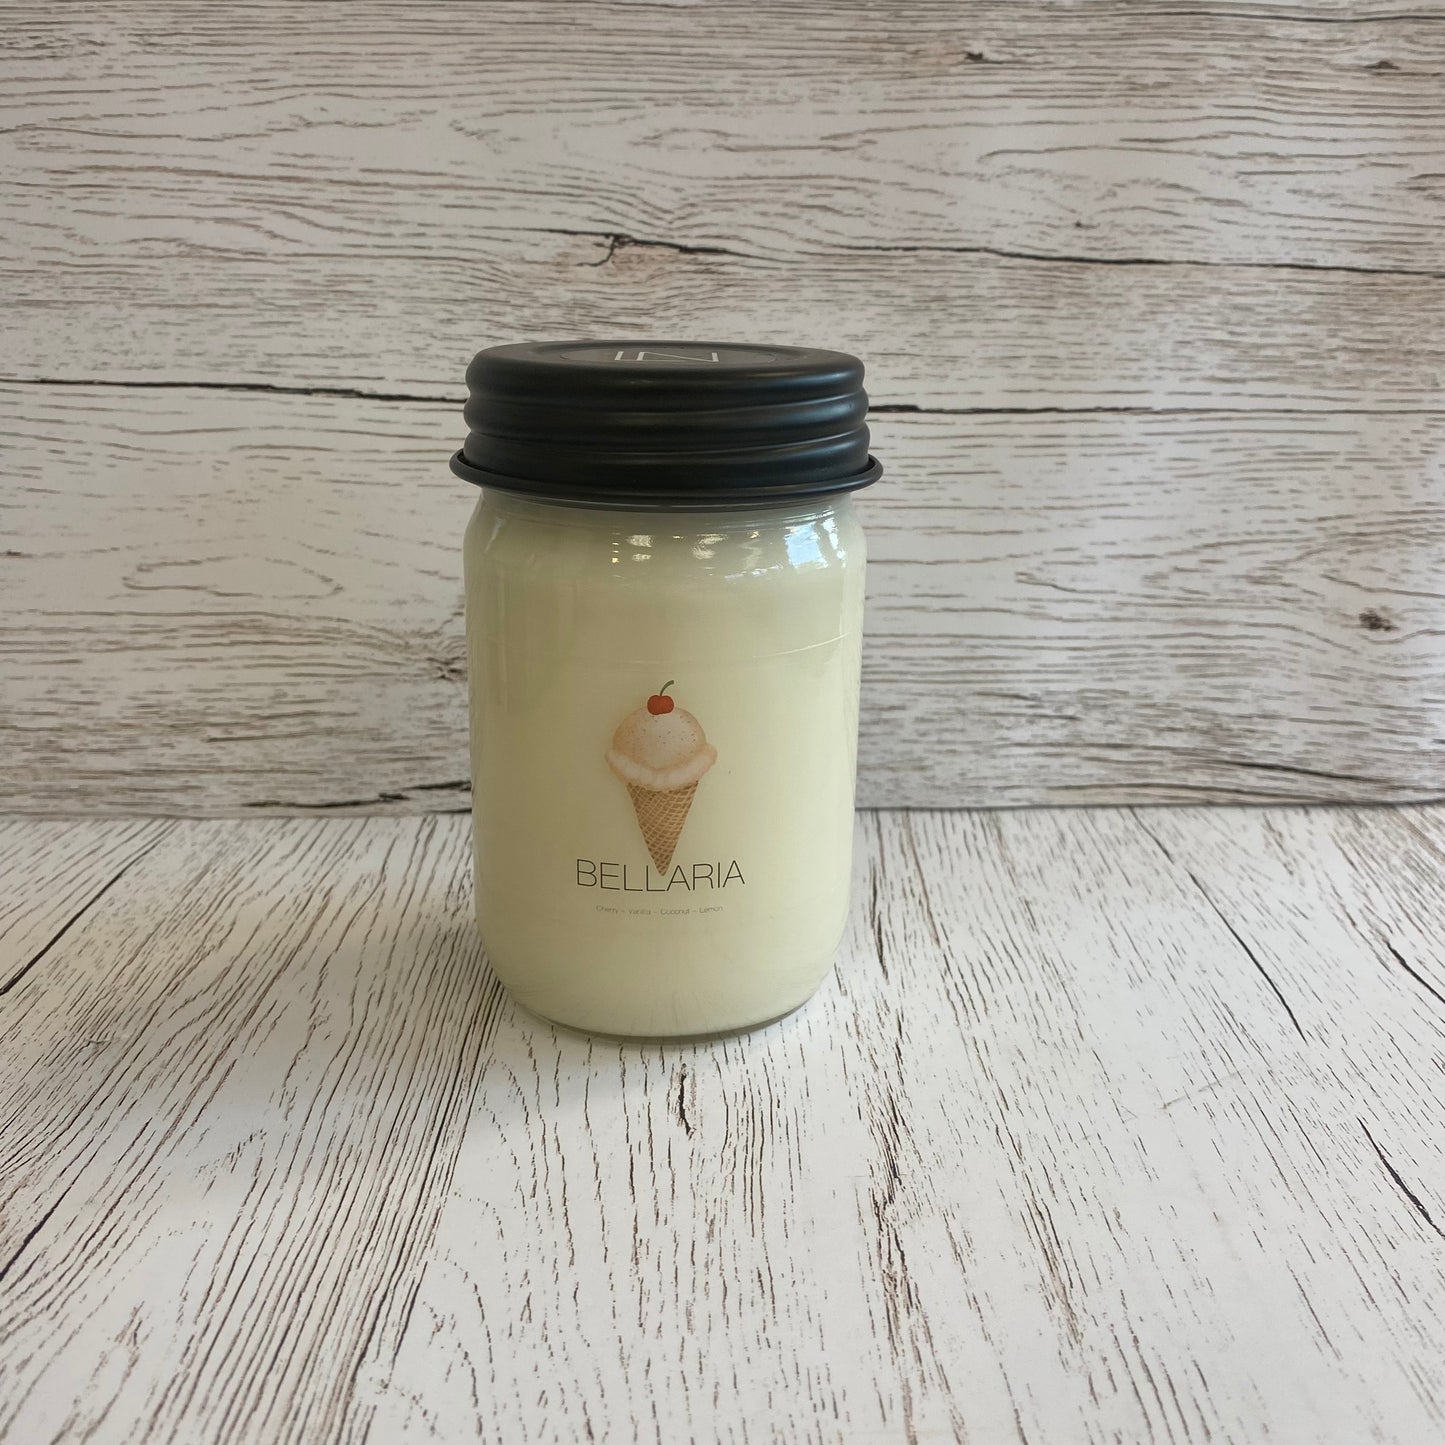 The Lake Collection Candles